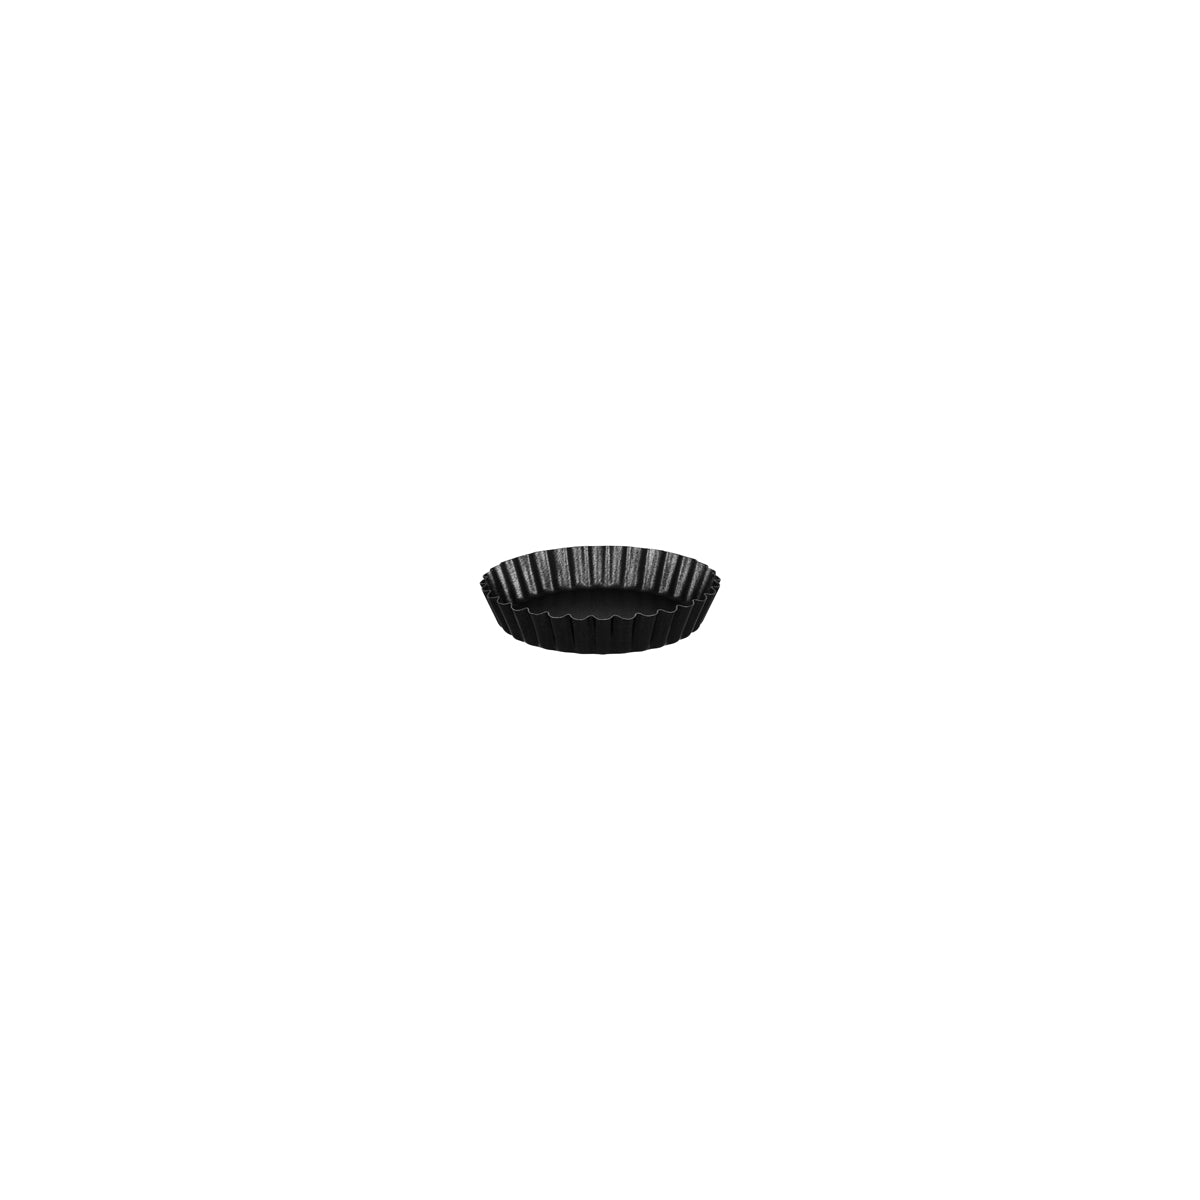 67416 Guery Tart Mould 36 Ribs Round Fluted Non-Stick 85x16mm Tomkin Australia Hospitality Supplies